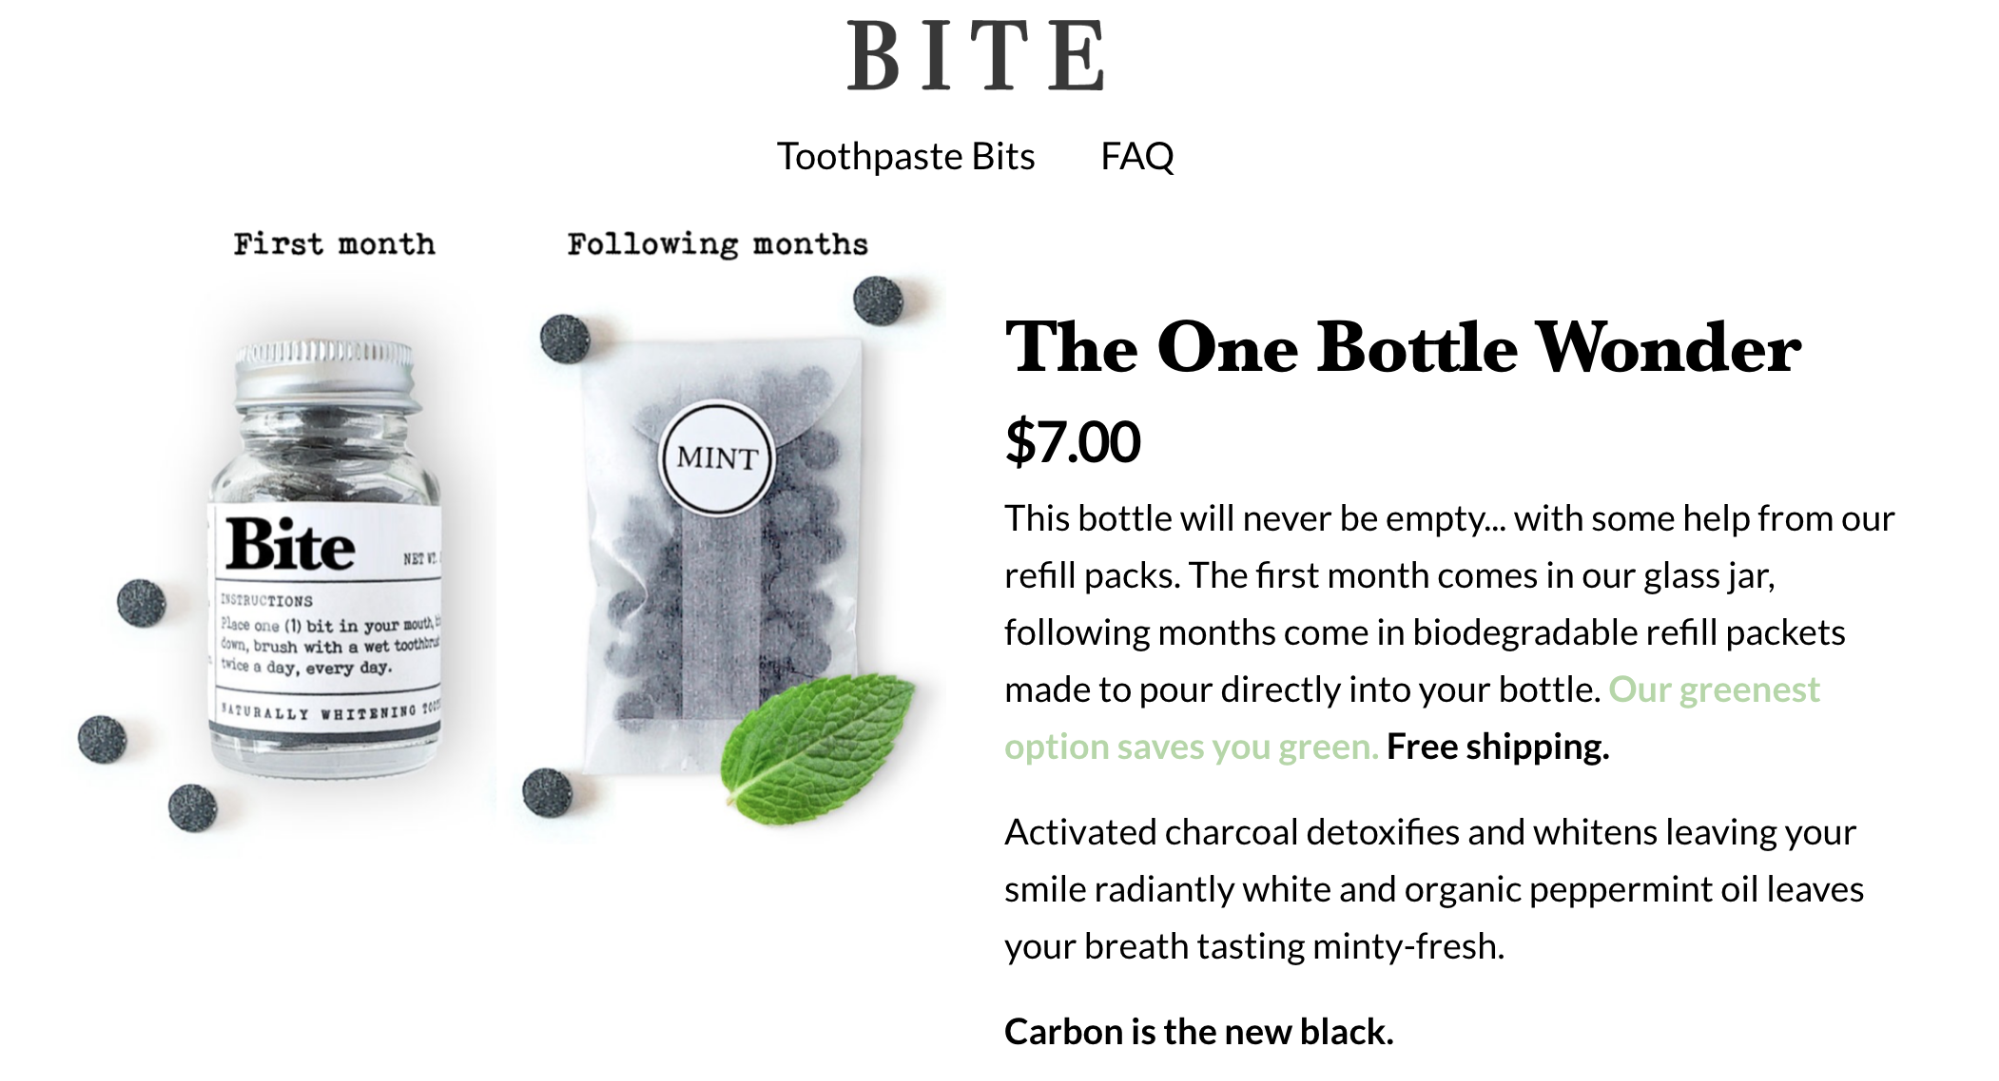 Screenshot showing a product page on Bite